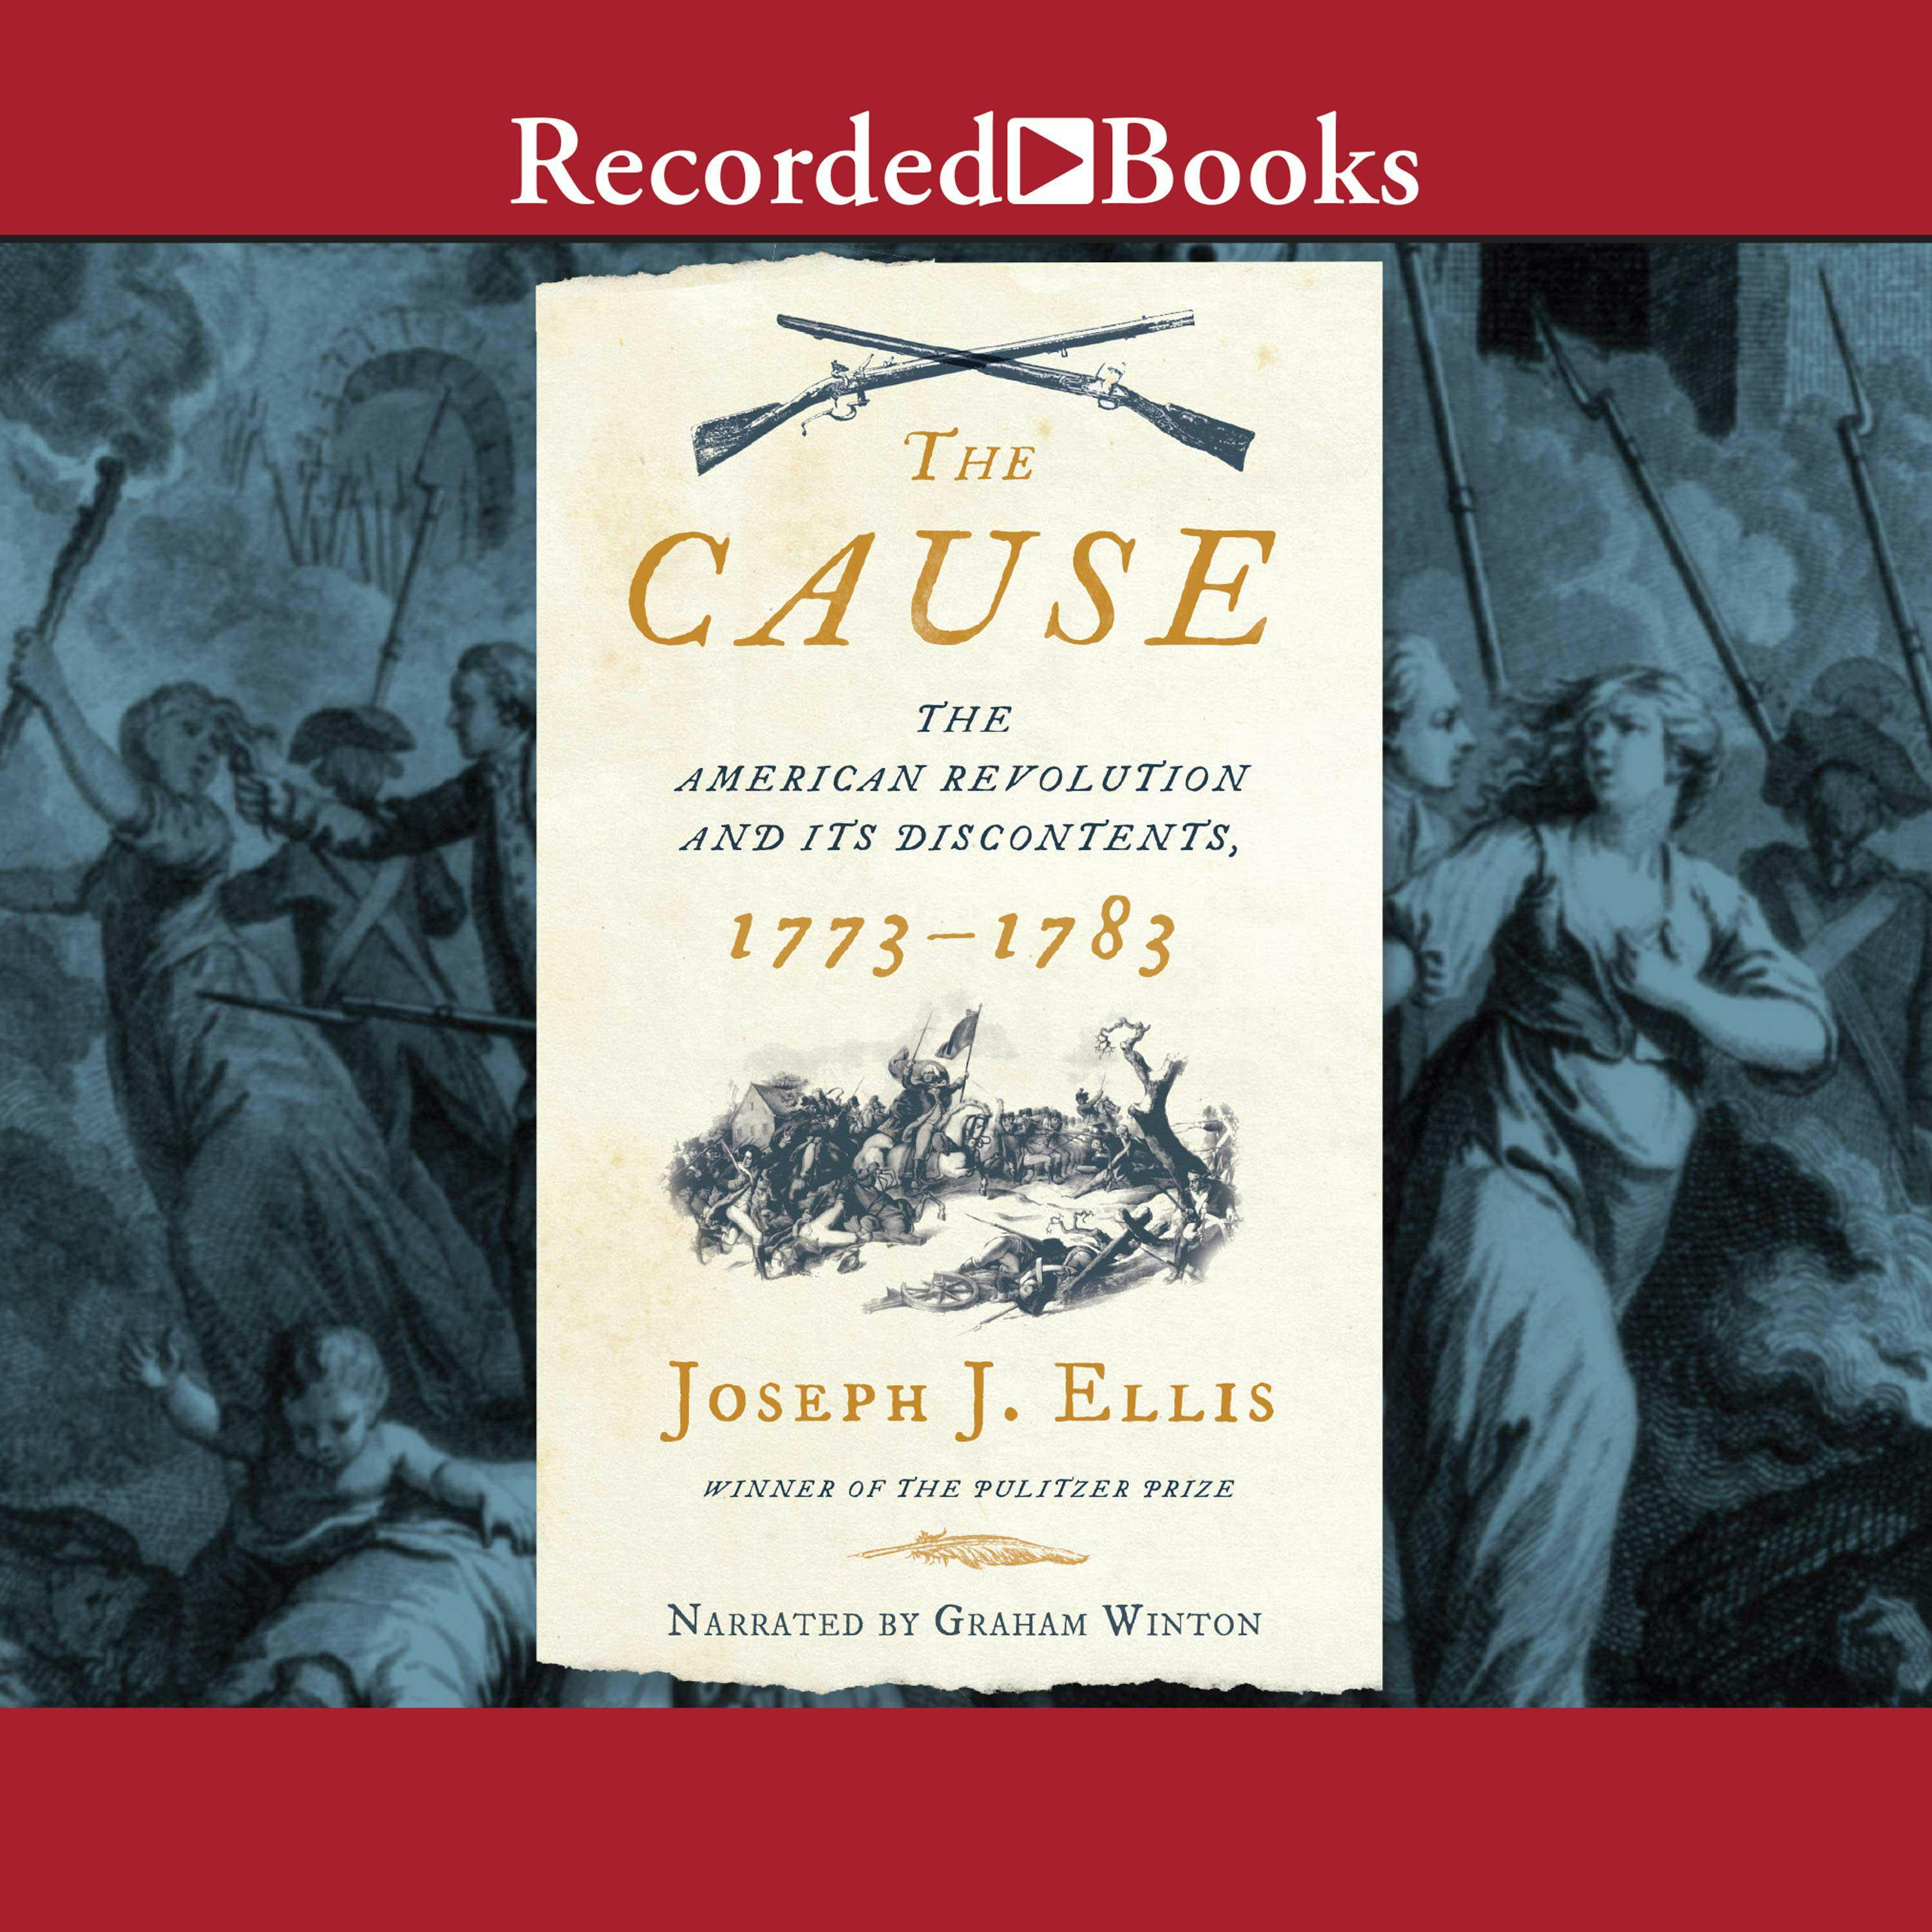 The Cause: The American Revolution and its Discontents, 1773-1783 - Joseph J. Ellis